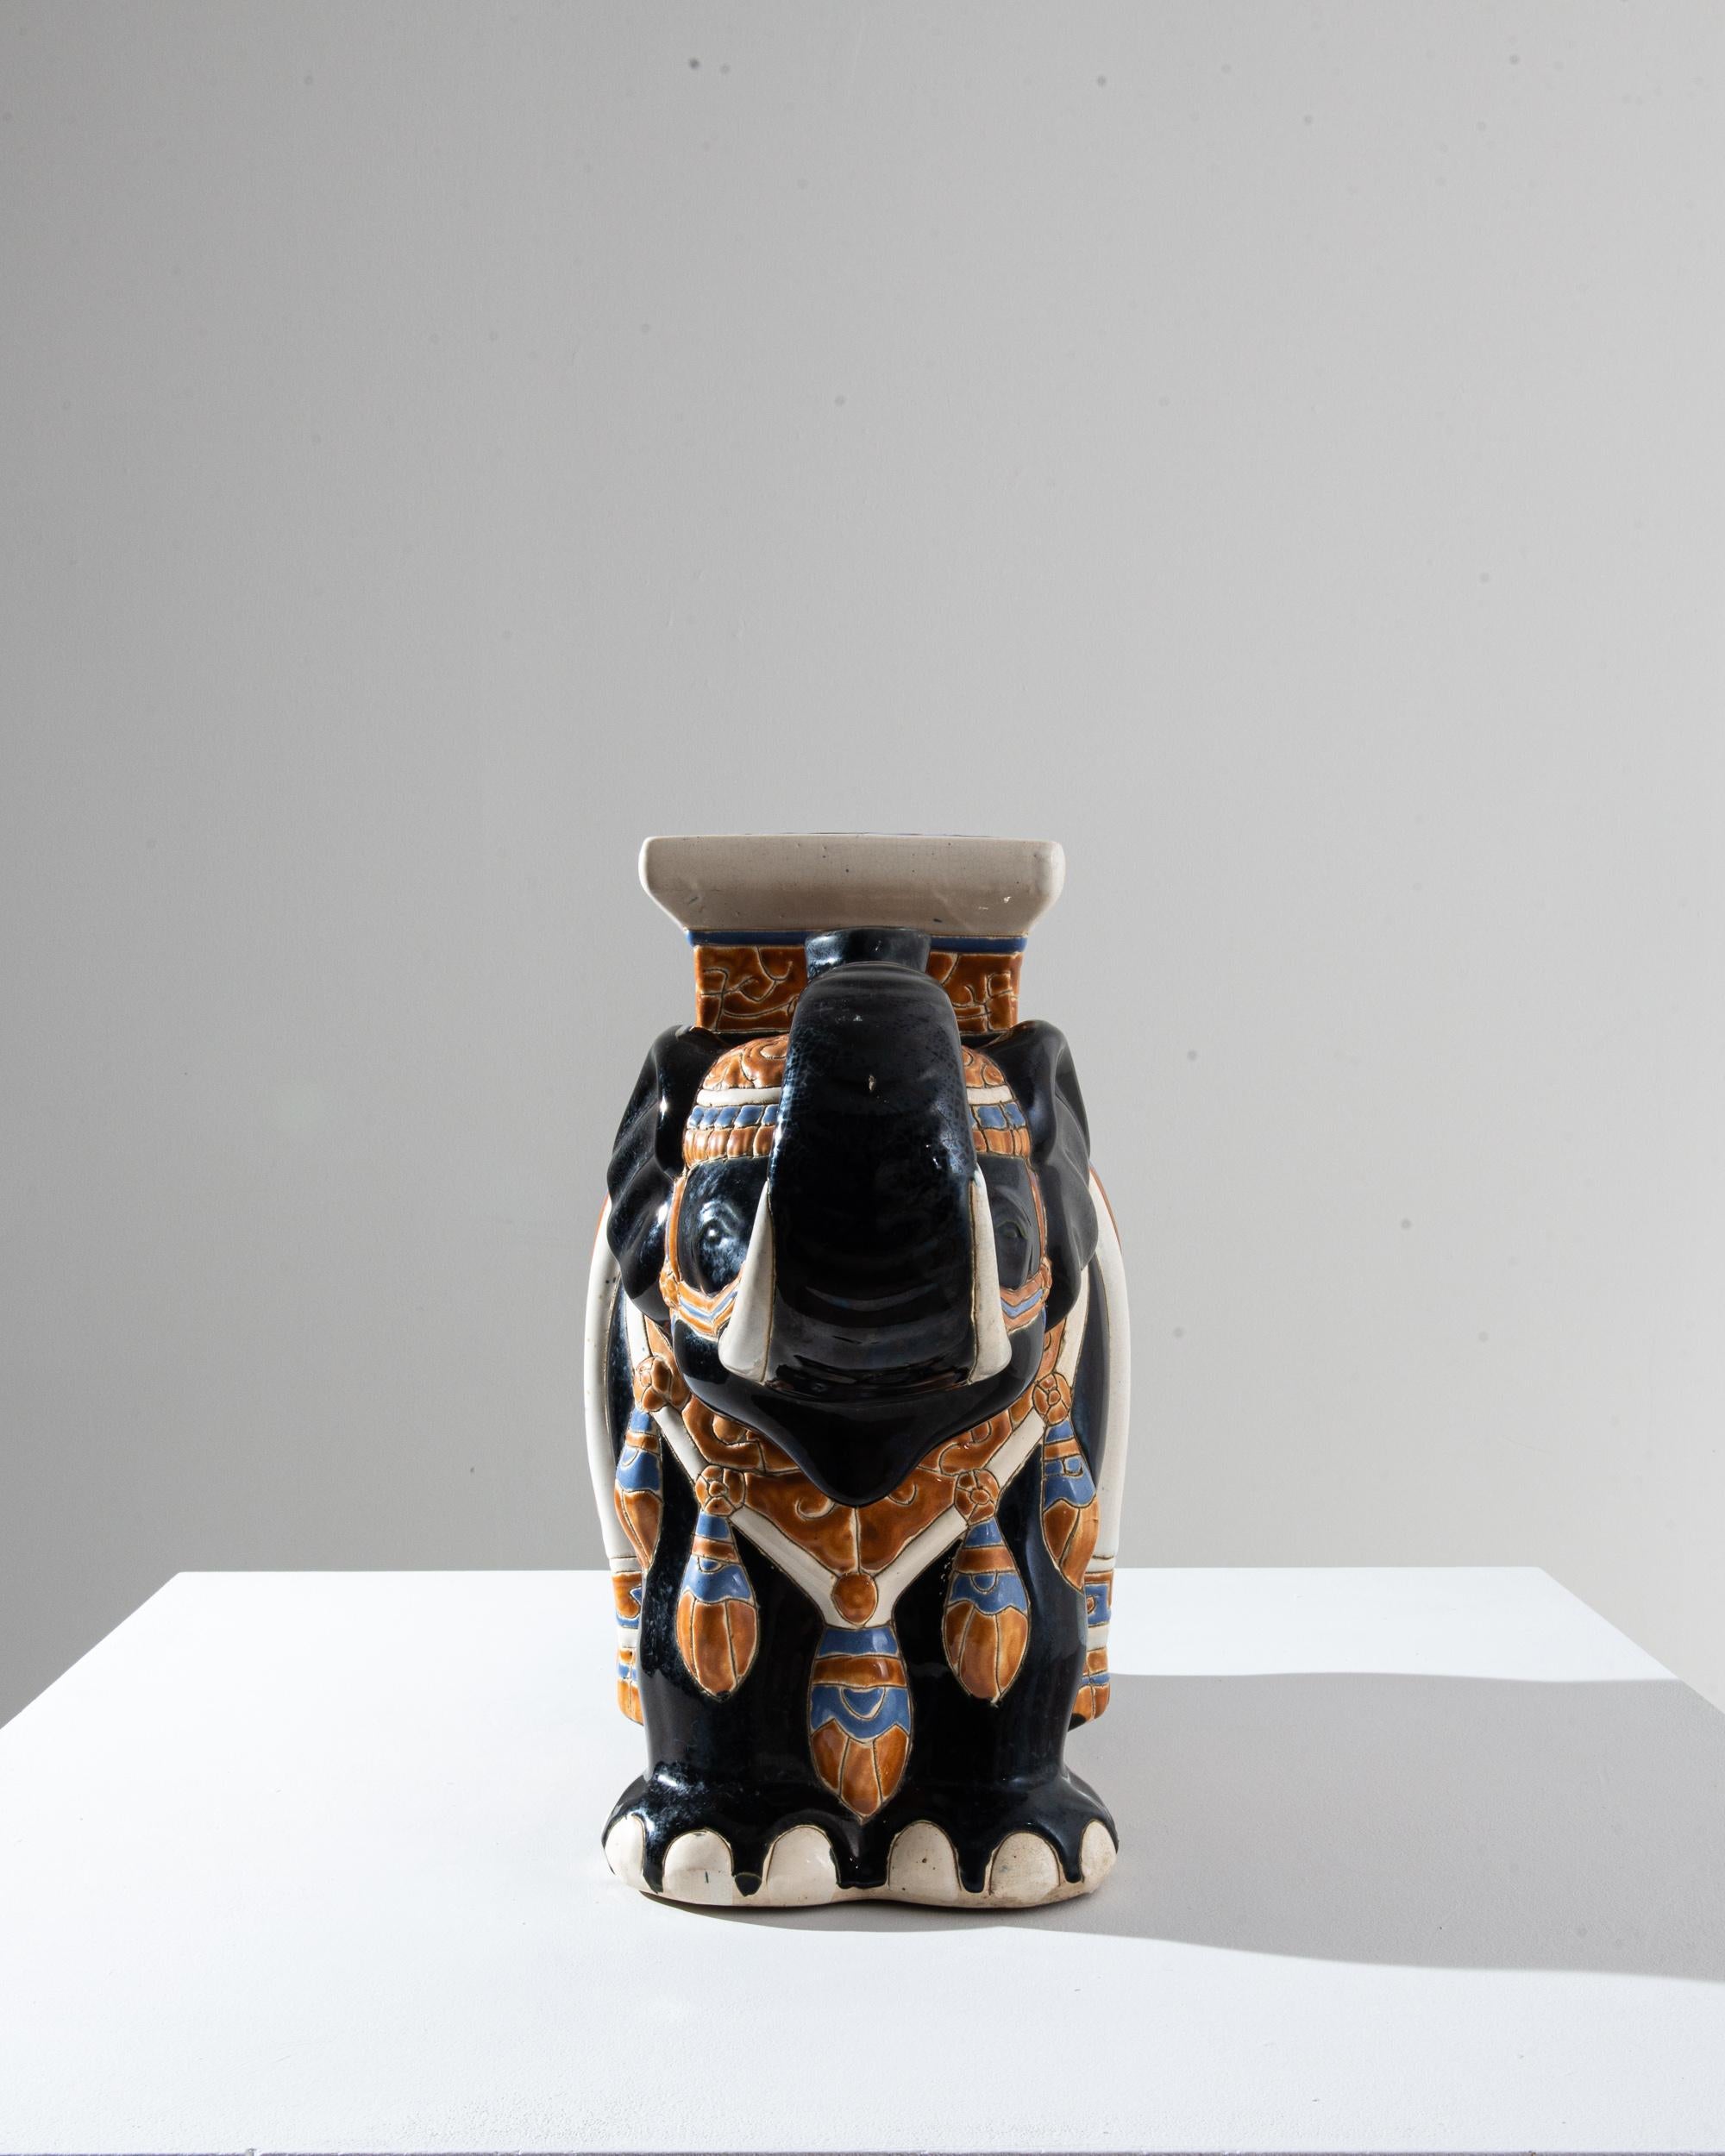 A ceramic decoration from 1960s France in the shape of an elephant. Glazed in a deep blue laced with powder blue and yellow ochre; the saddle, seat and blanket are delicately patterned — reflecting Chinese and Arabic influences — suggesting the